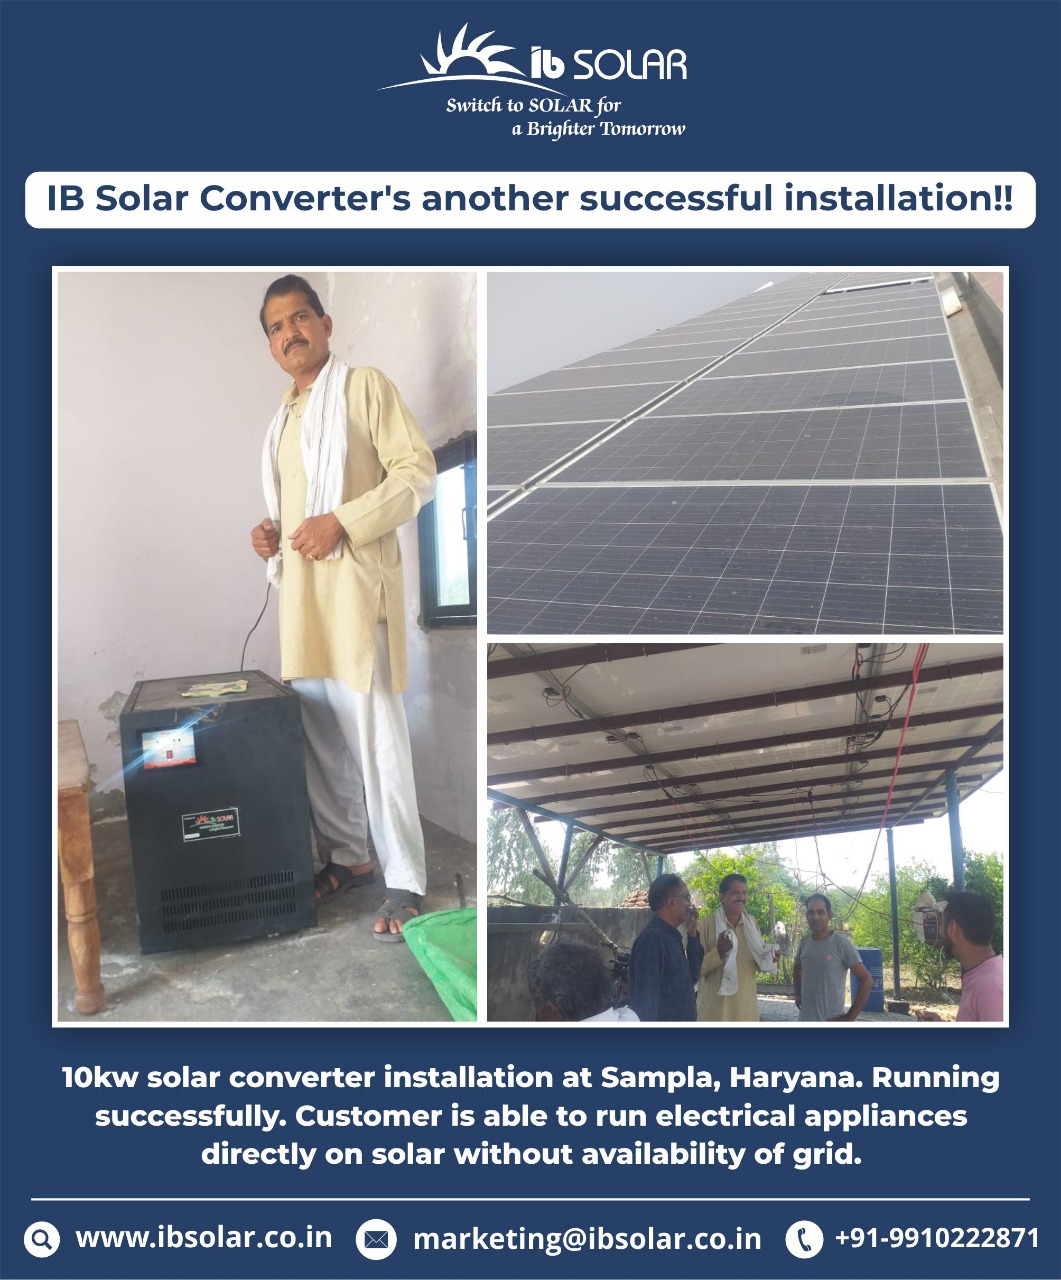 IB Solar Converter’s another successful installation!!